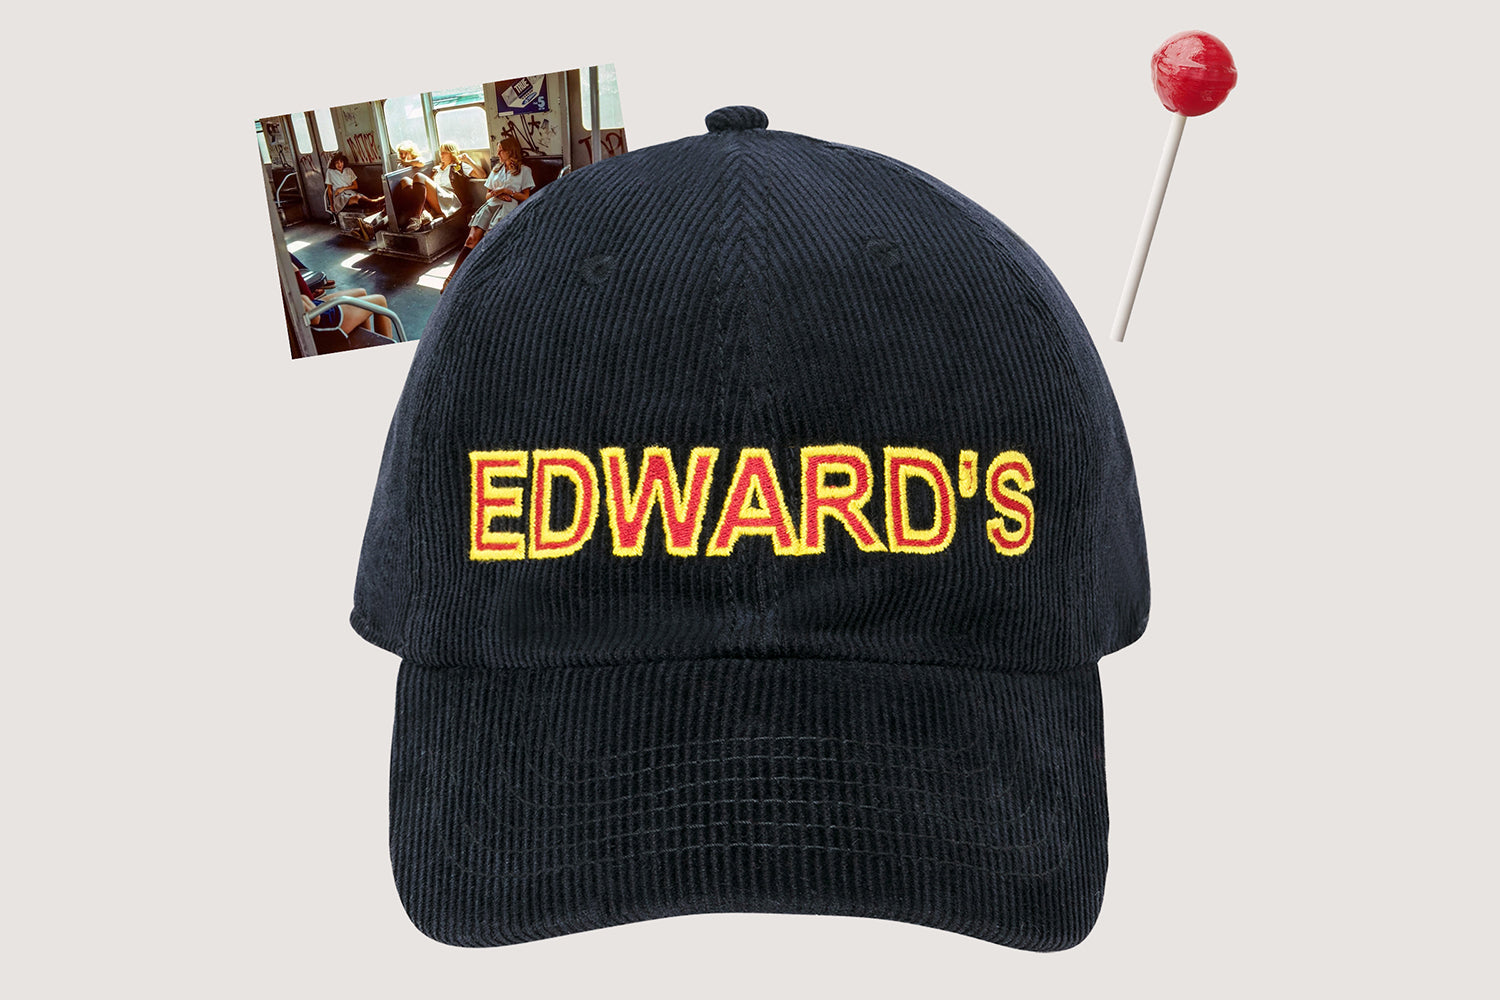 Could I Get Another Coke? (Collaboration with Edward's Restaurant available now)